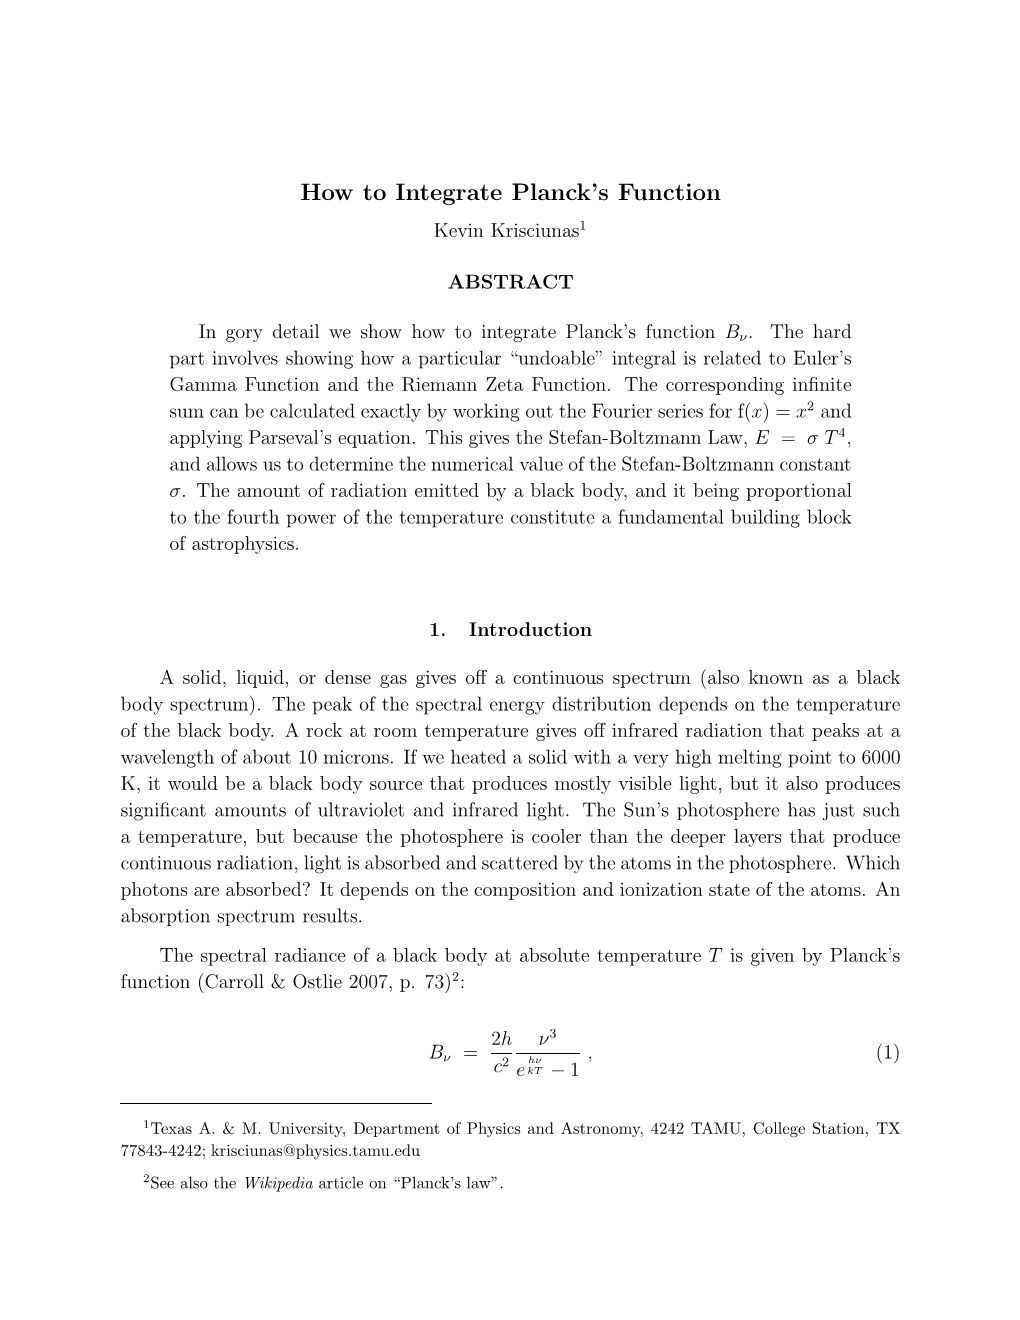 How to Integrate Planck's Function